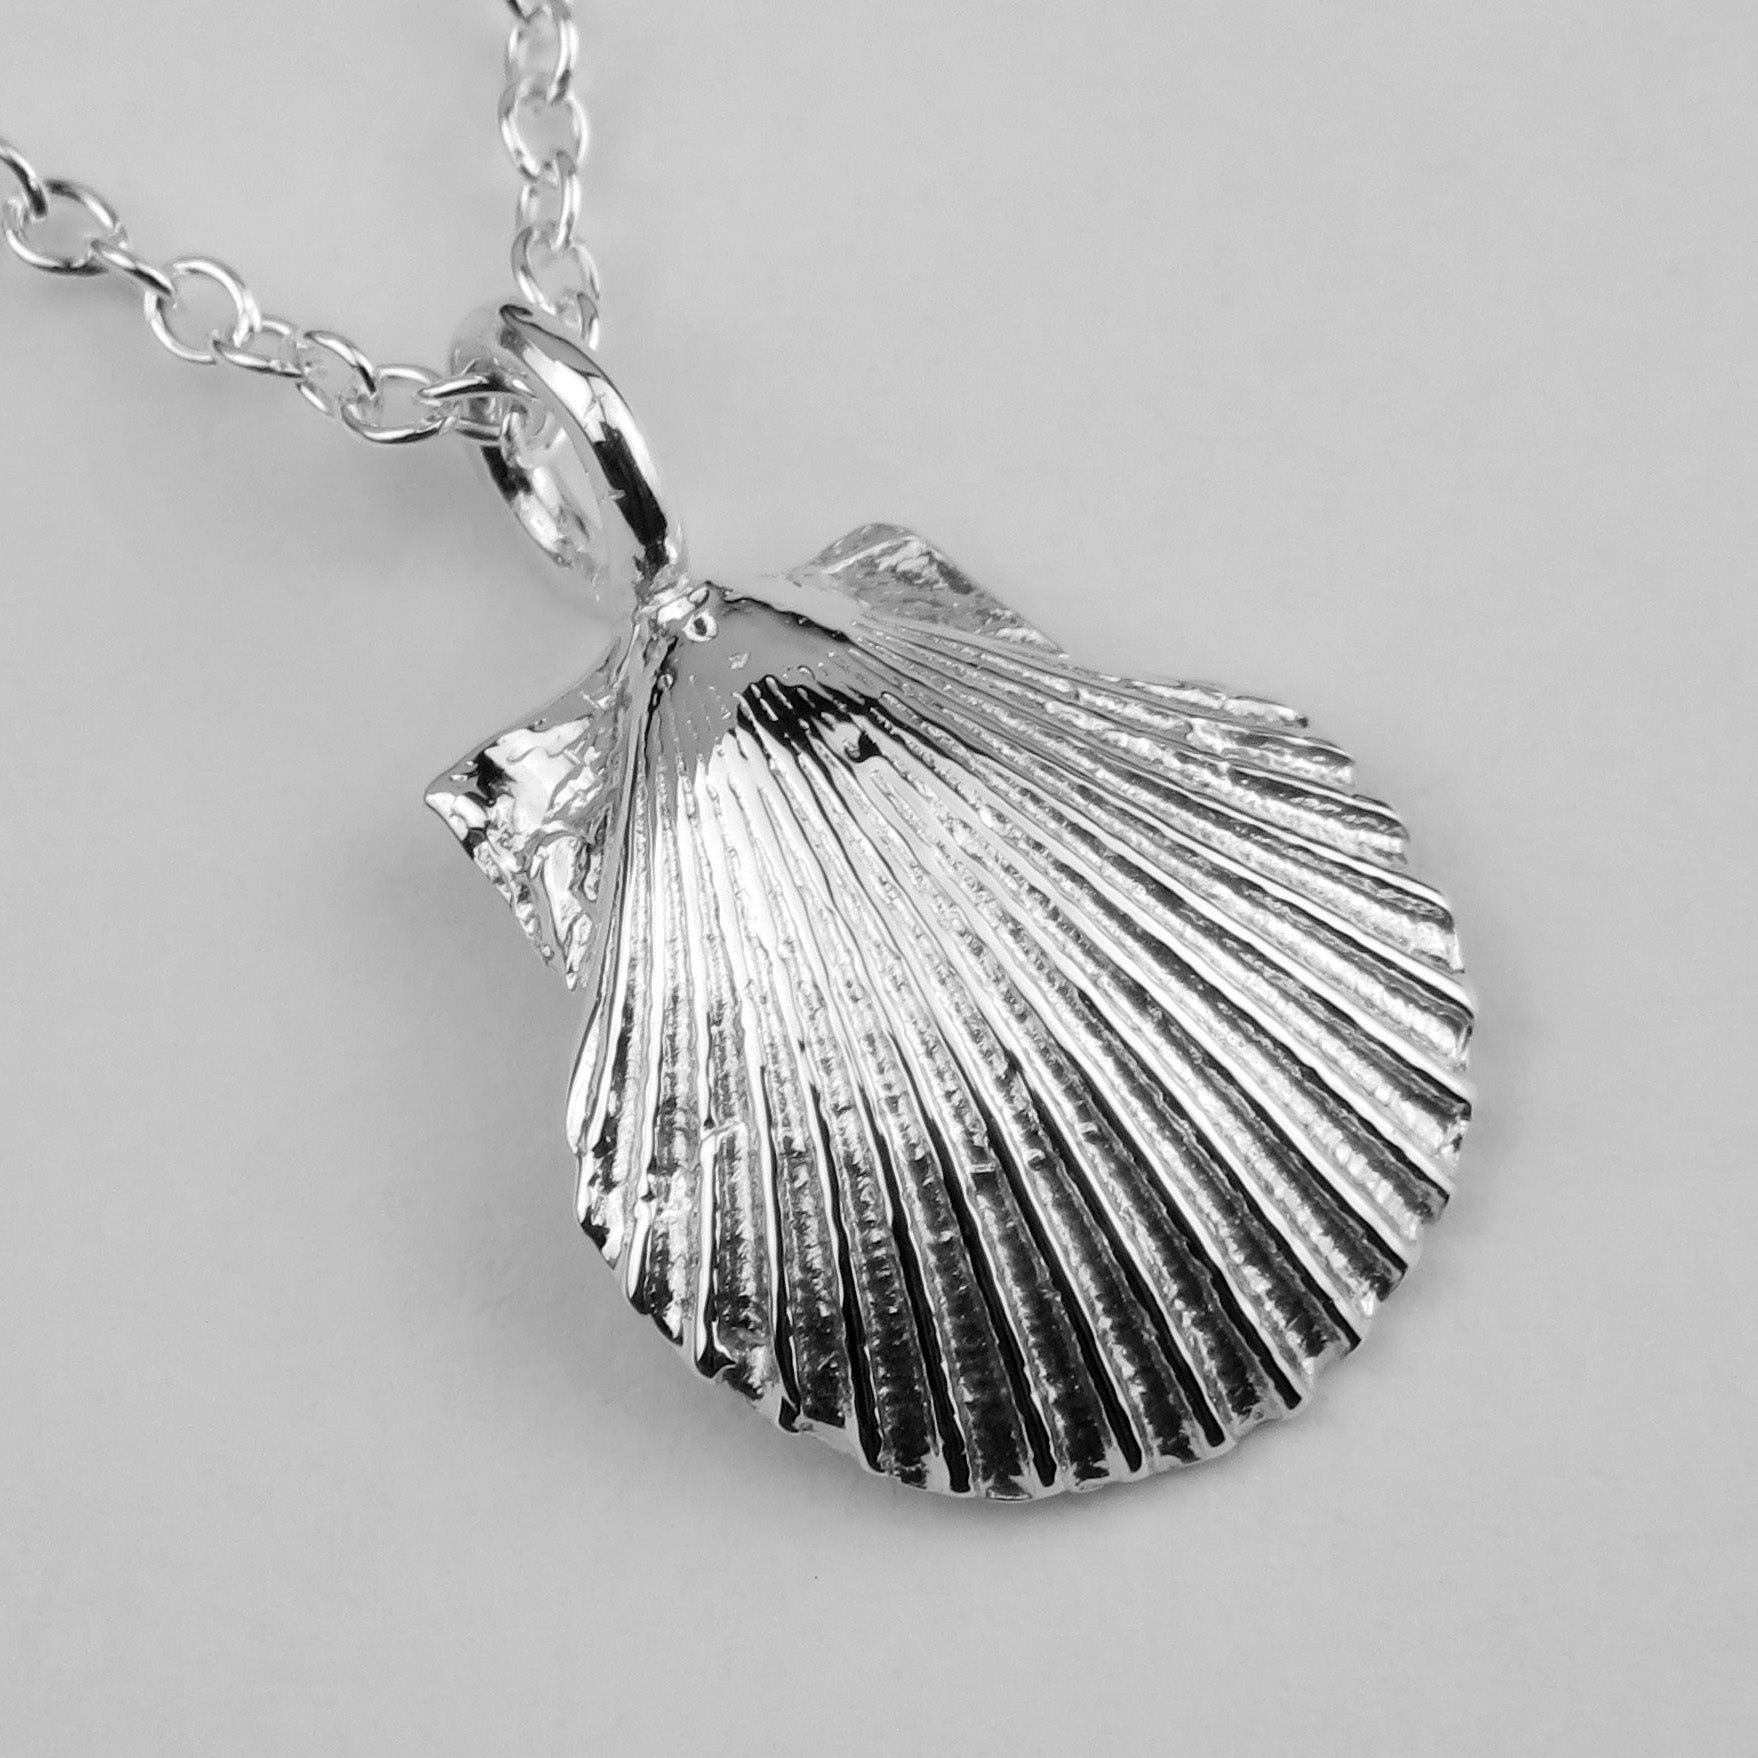 Portheras Scallop Shell Necklace - Natural Silver Cornish Jewellery -  Beautiful Sterling Silver from Cornwall